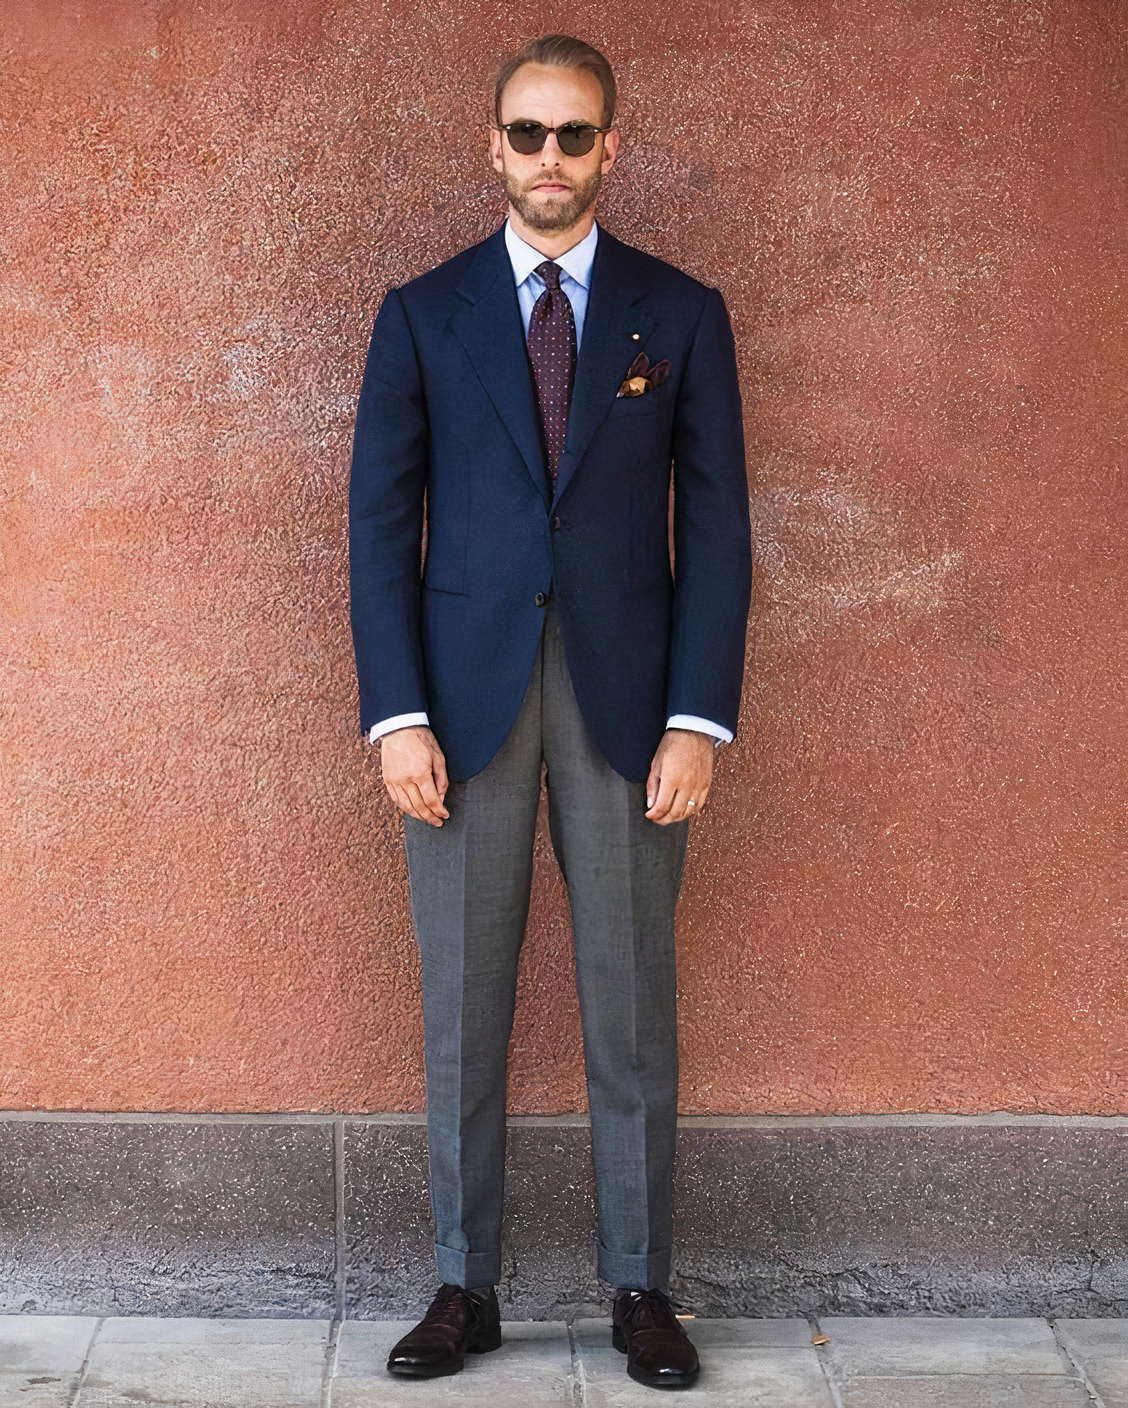 How to Wear Men's Separates Combinations